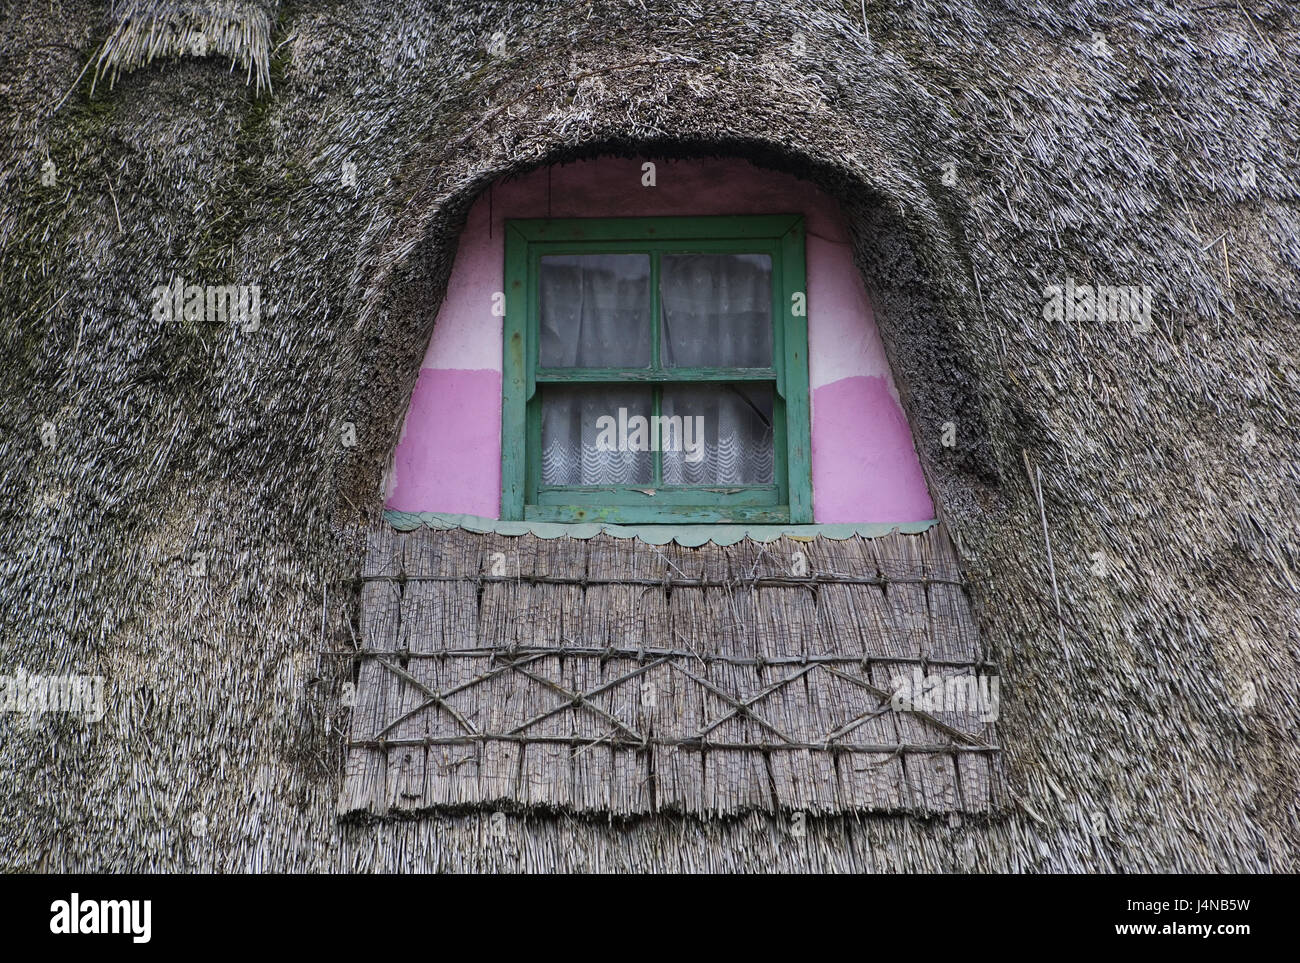 Ireland, Doolin, house, detail, thatched roof, window, Stock Photo